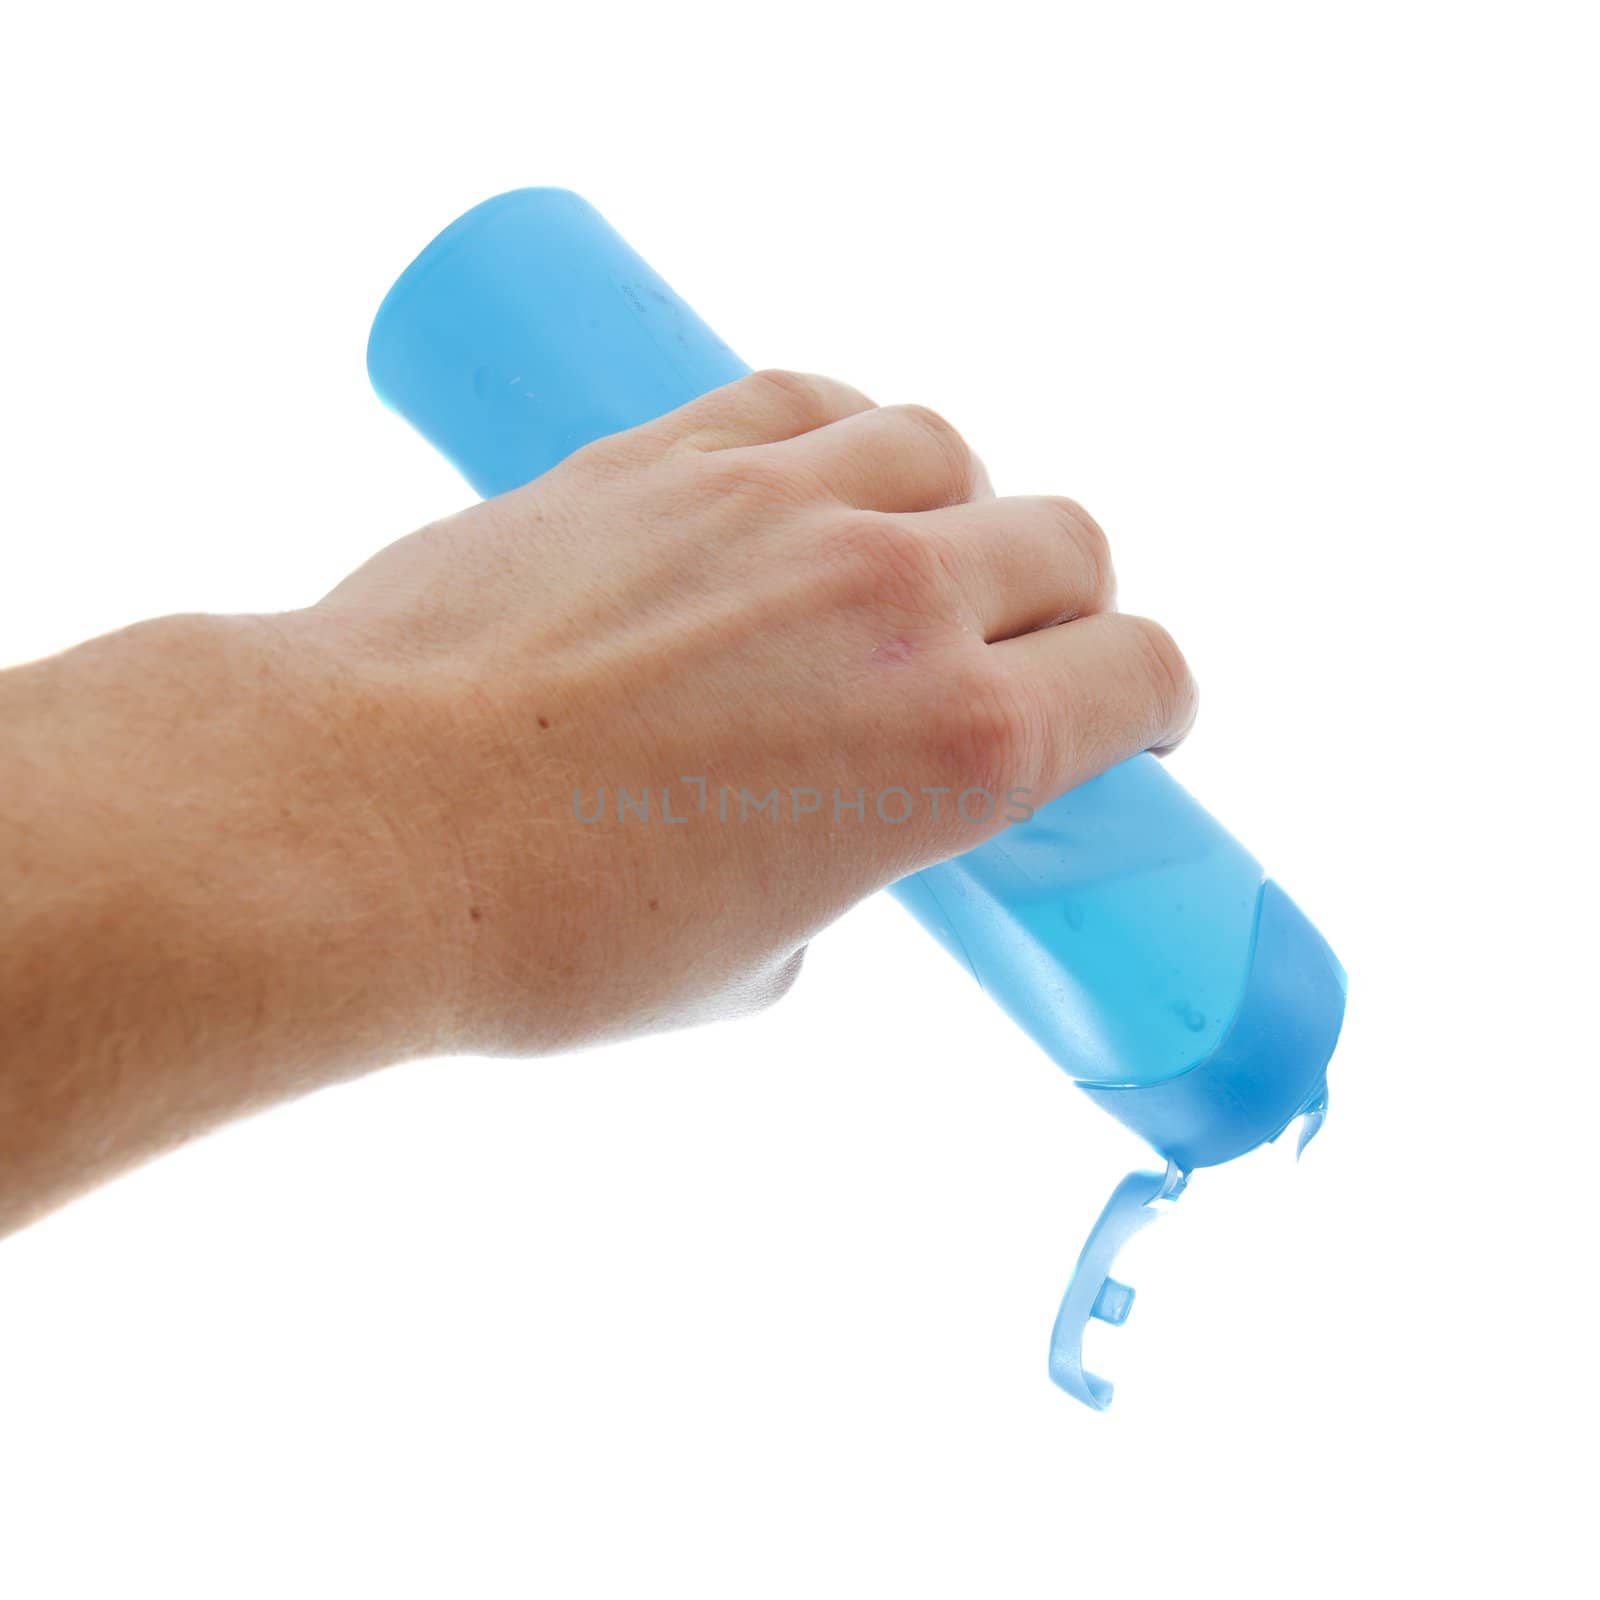 Pouring shower gel from a plastic bottle